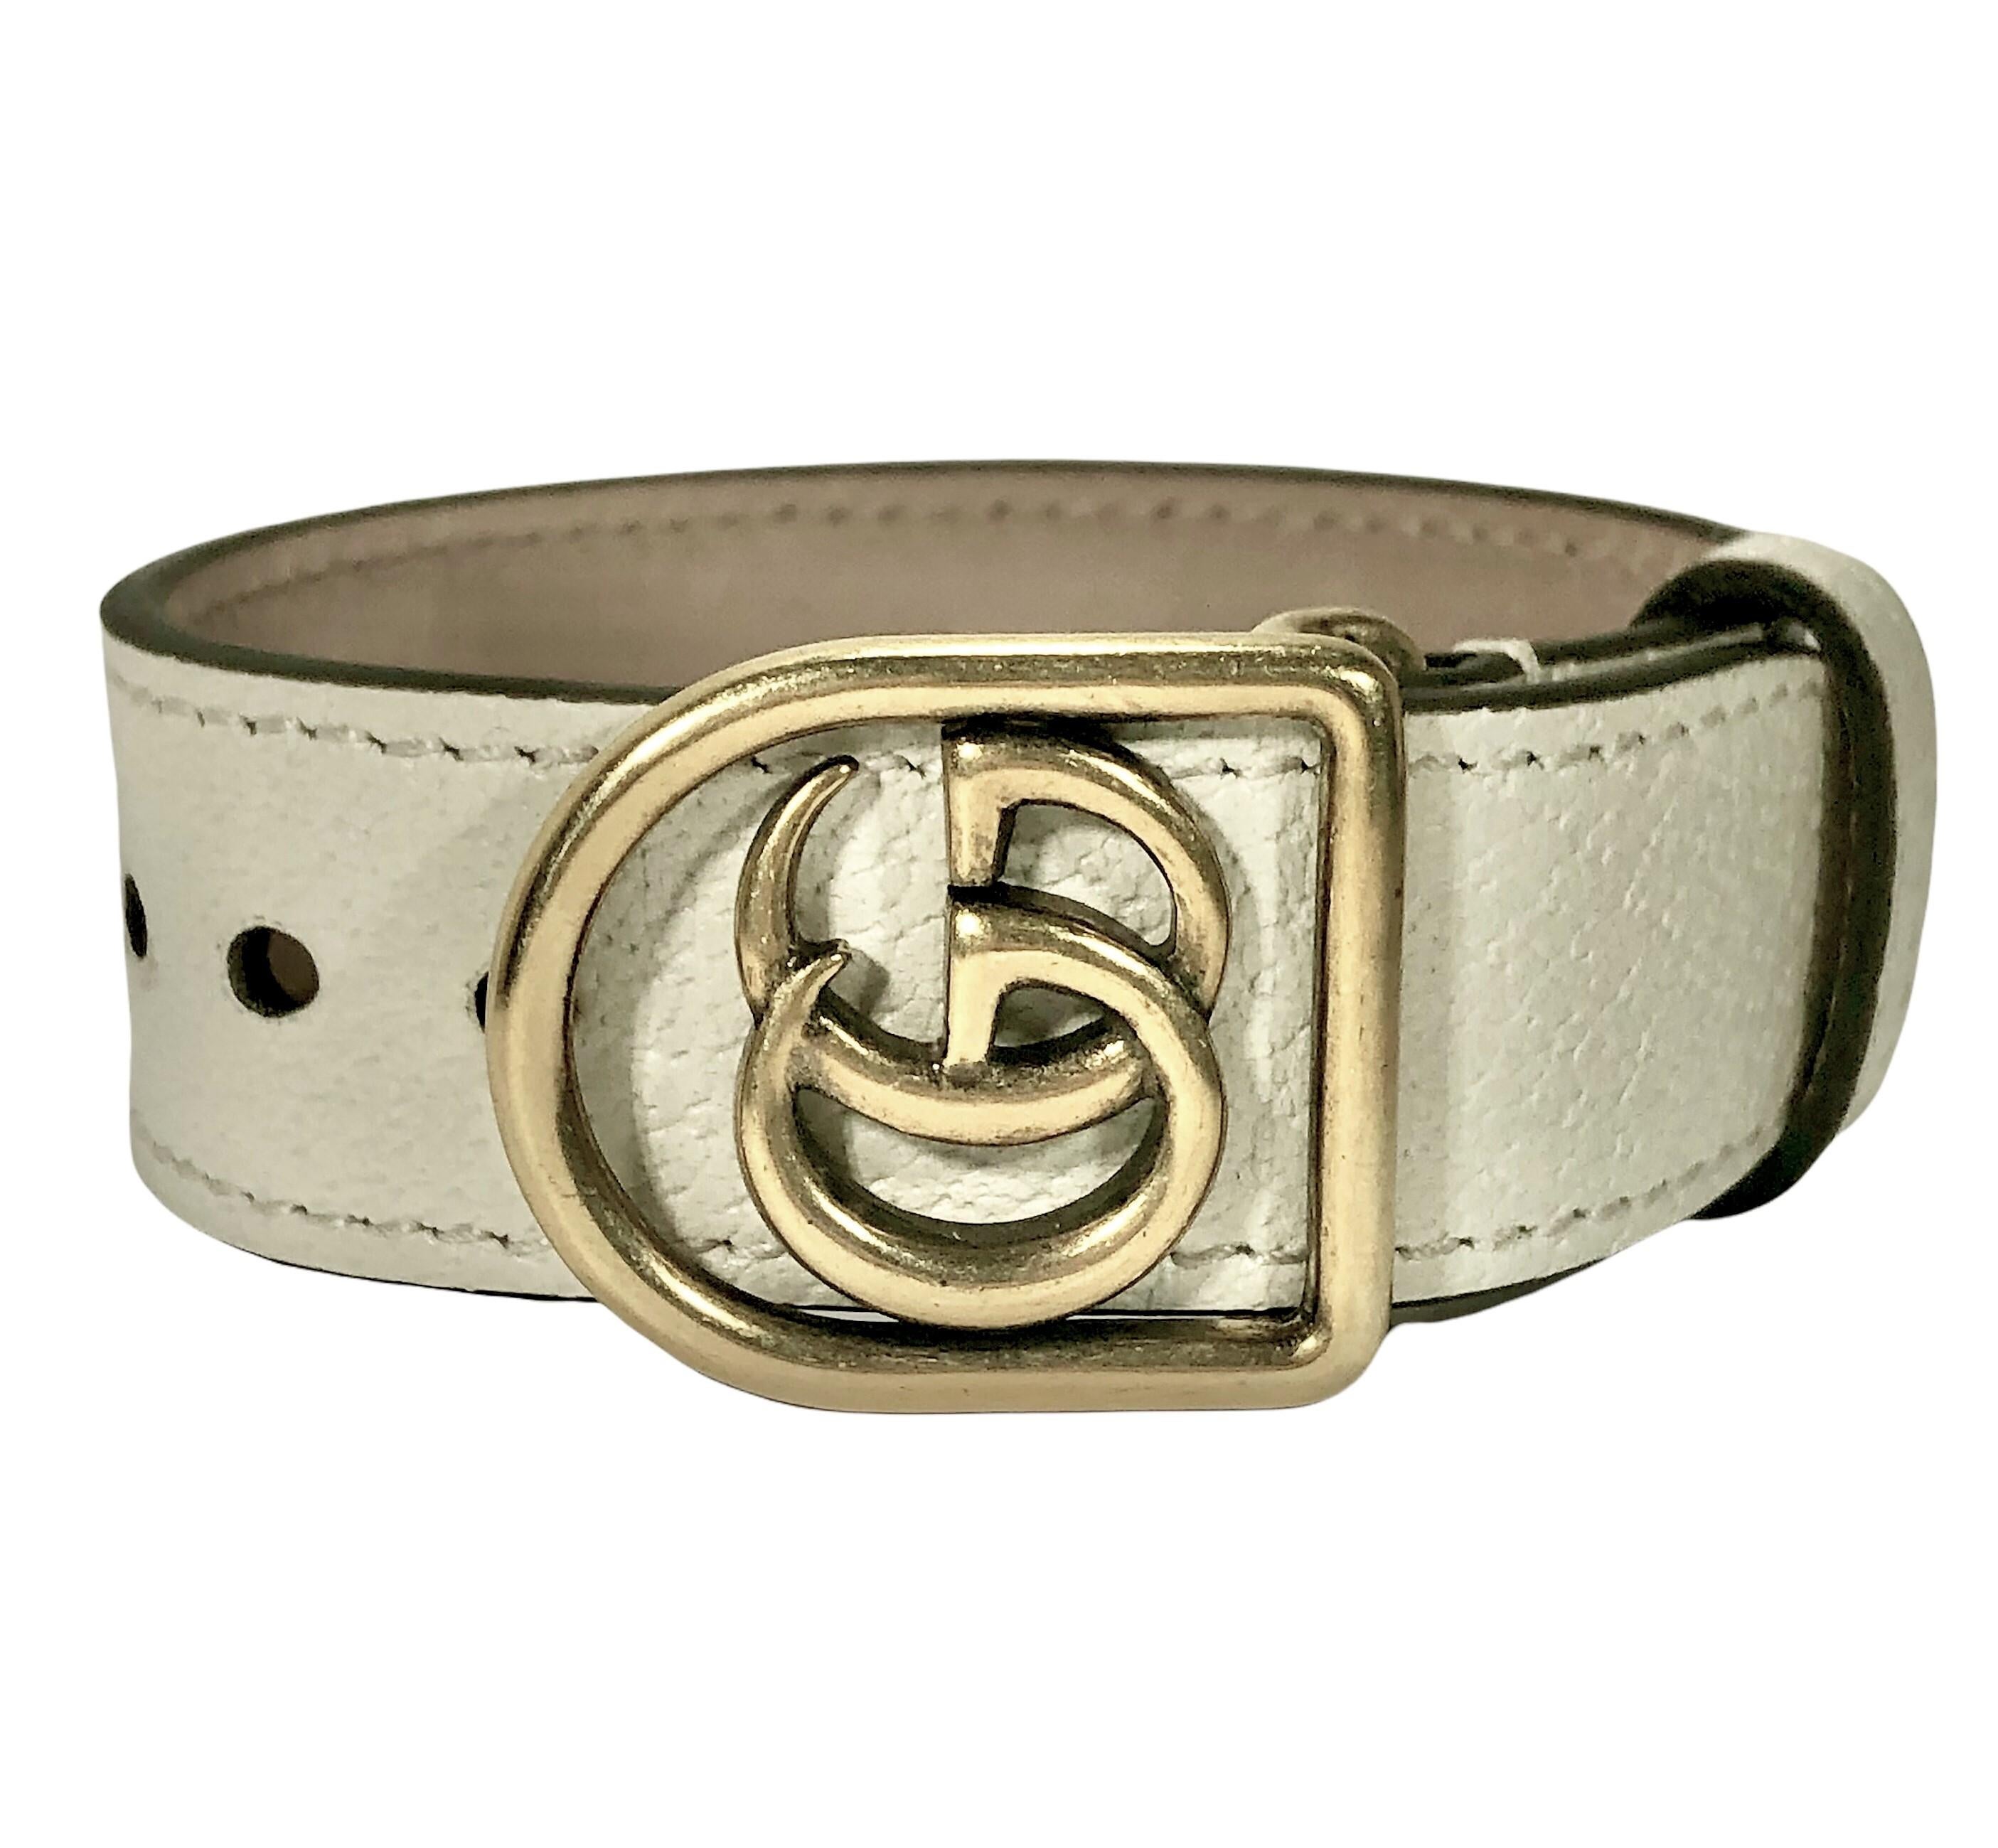 This lovely Italian Gucci Marmont gold tone Double G bracelet has an off white  leather strap.  Total length is 11 1/8 inch and the width is a very substantial 1 1/8 inch. Embossed GUCCI-MADE IN ITALY ON THE INSIDE. This bracelet fits a medium to